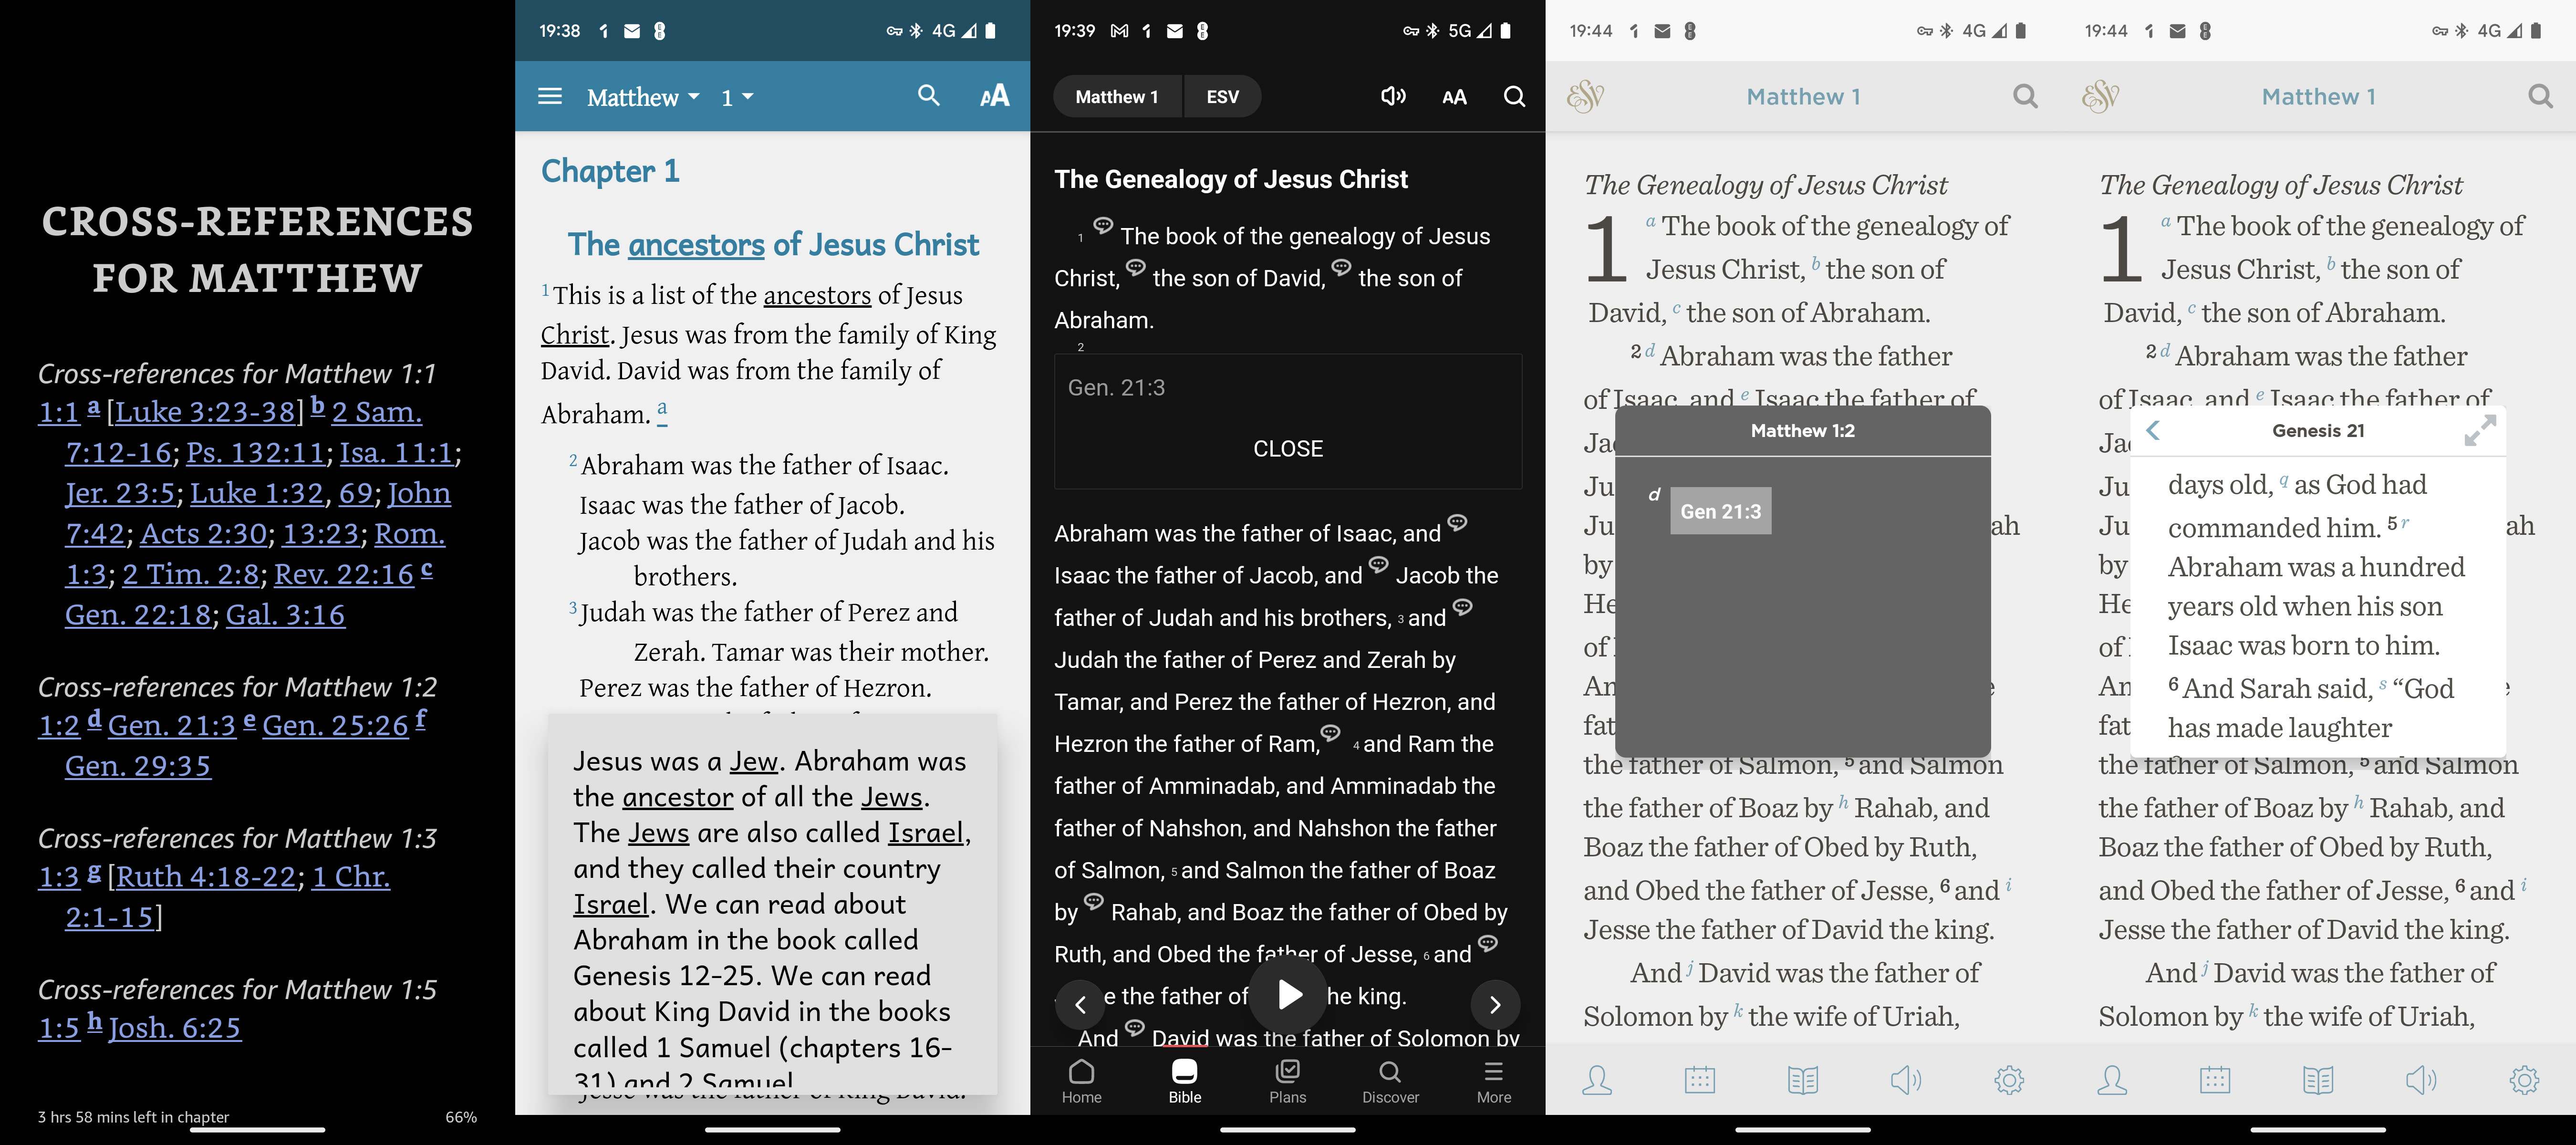 screenshots of some bible apps showing cross-references